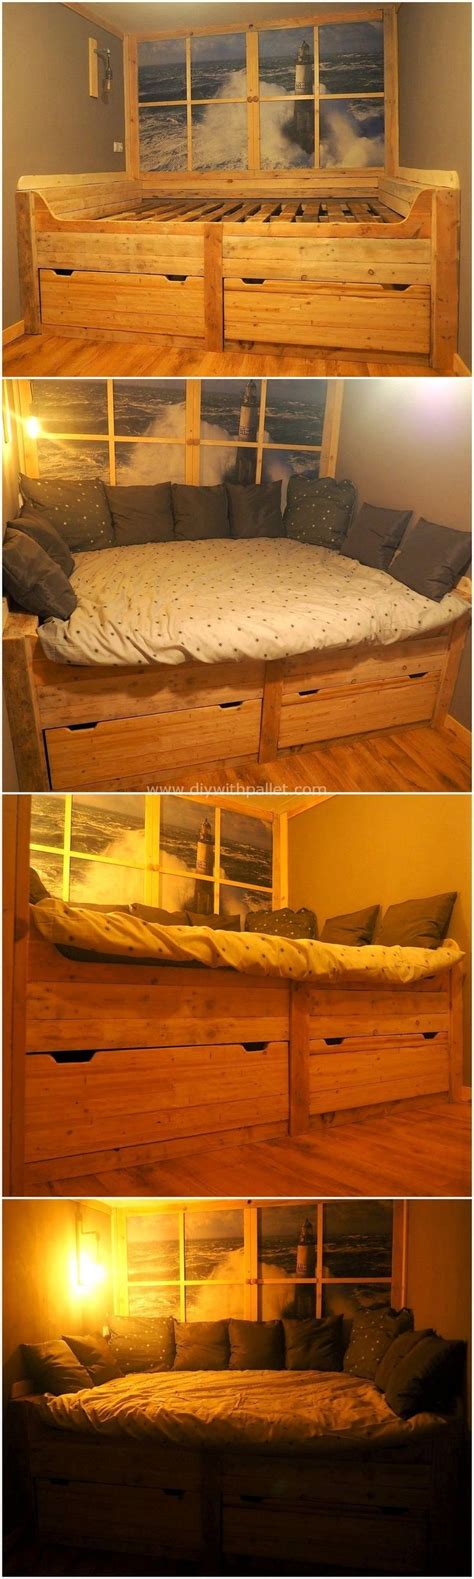 Pallet Diy, Pallet Projects, Home Projects, Recycled Pallet, Trendy Bedroom, Diy Bedroom ...